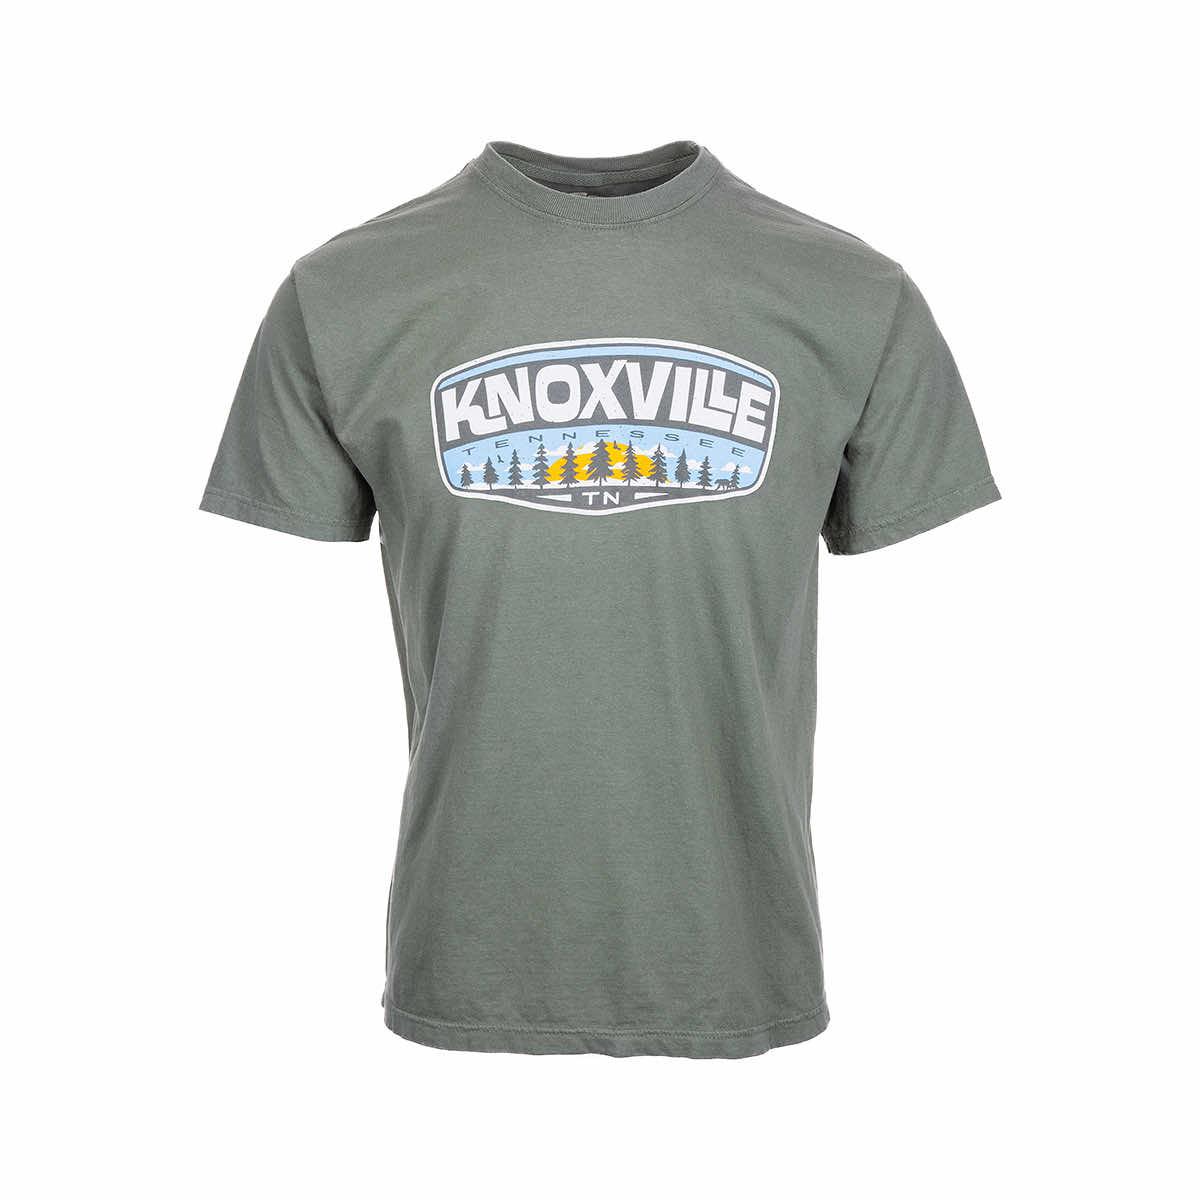  Knoxville Pines Short Sleeve T- Shirt